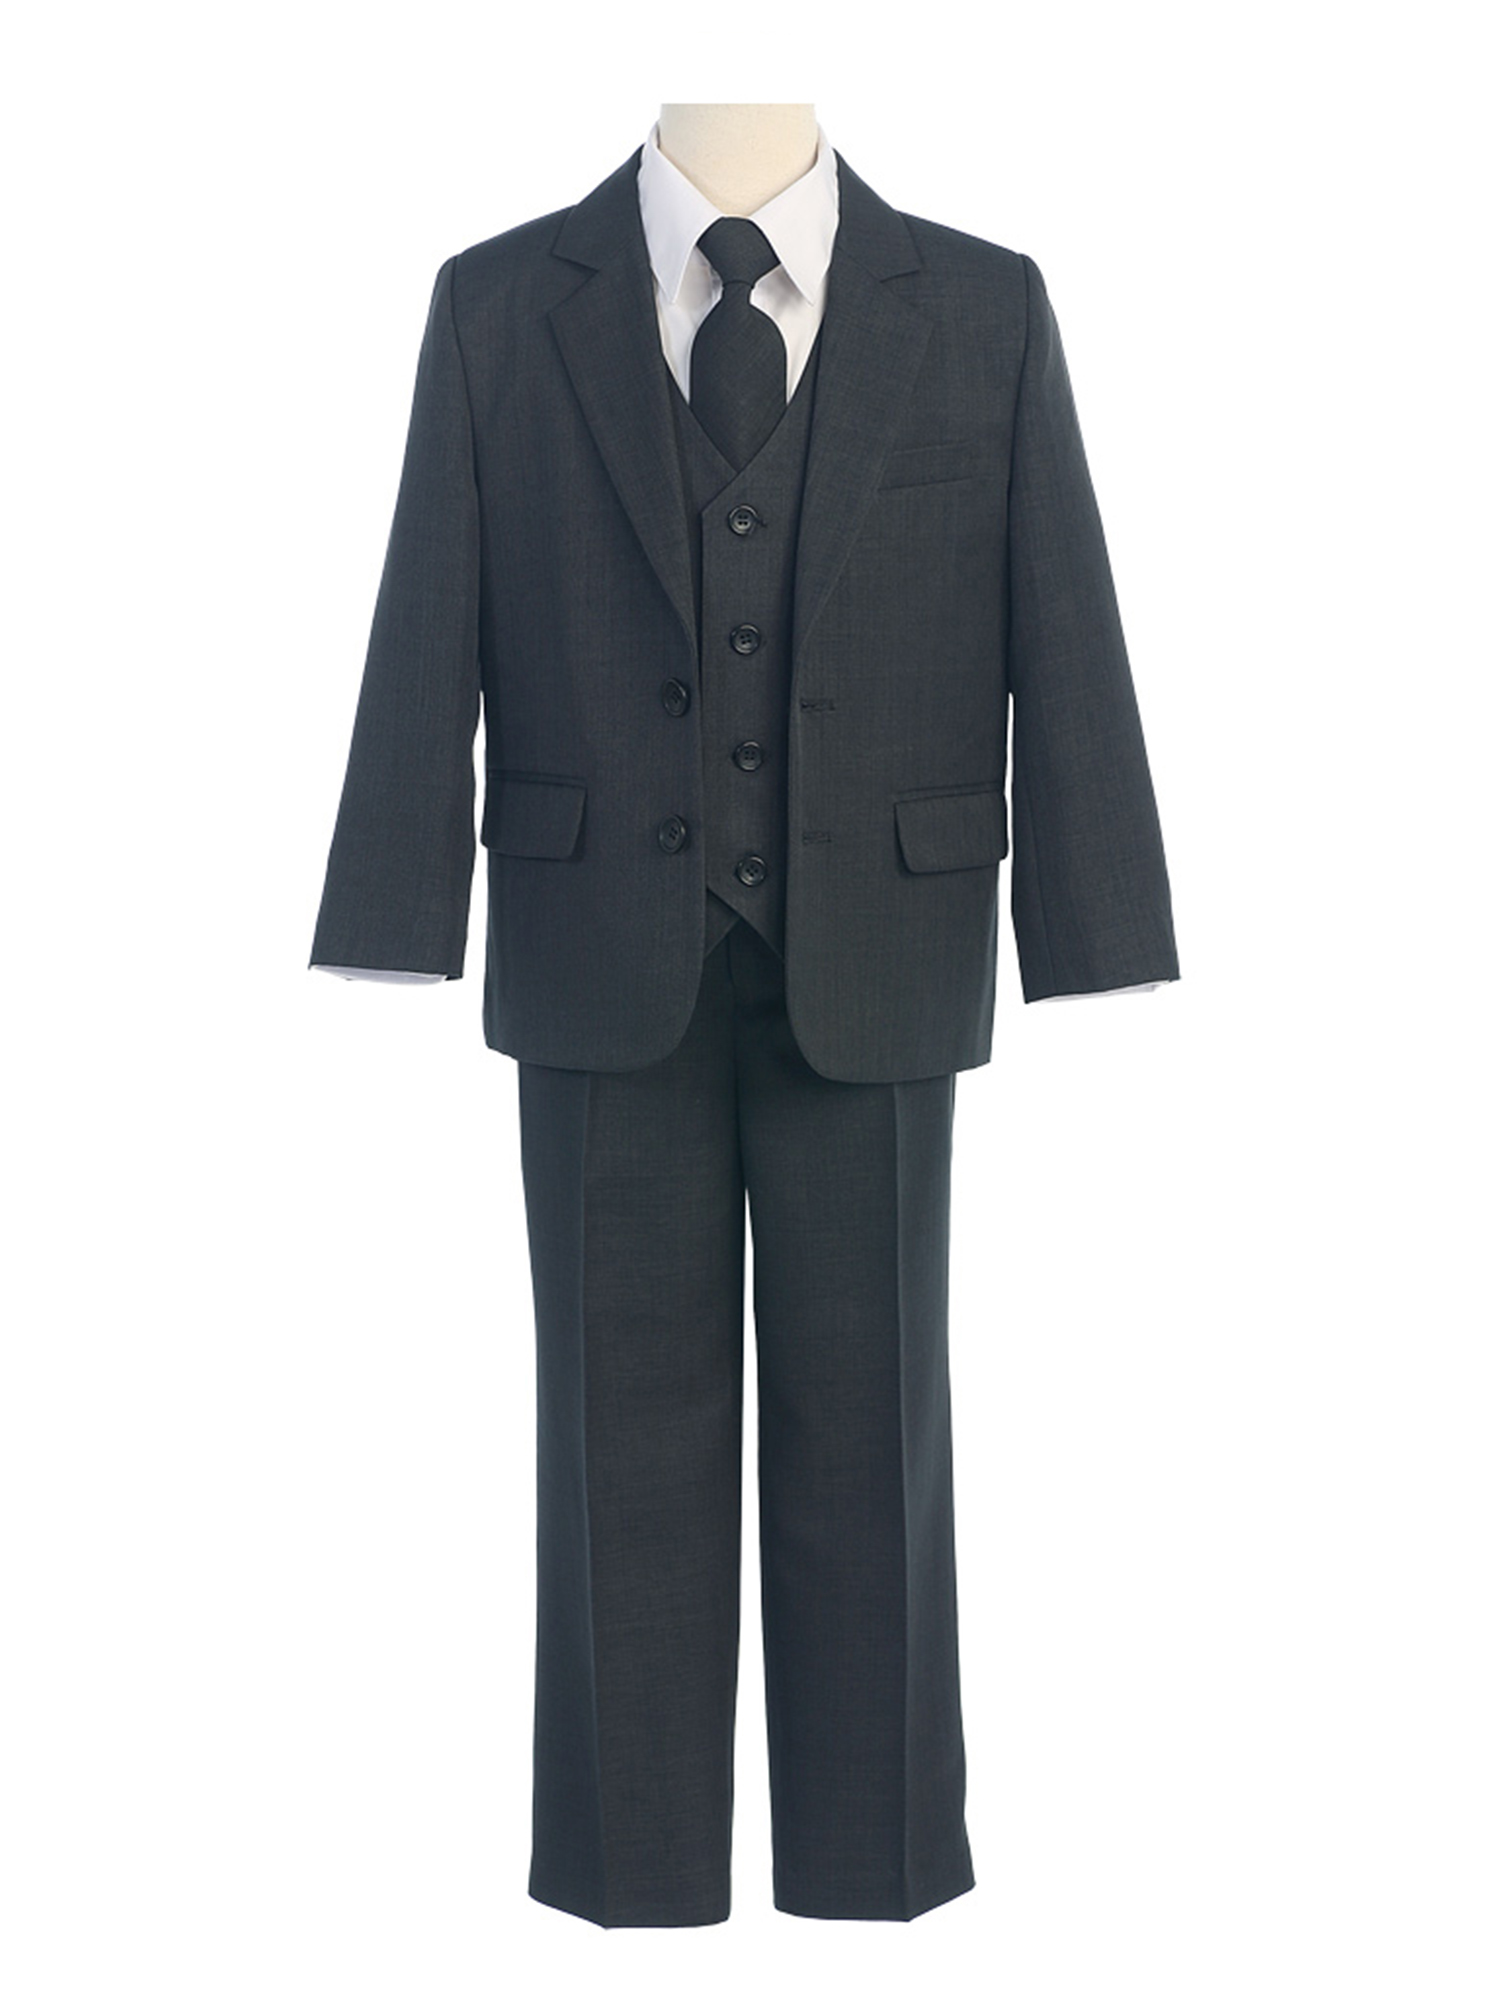 COLE Boys Suit with Shirt and Vest (5-Piece) - Charcoal Grey - Size 5